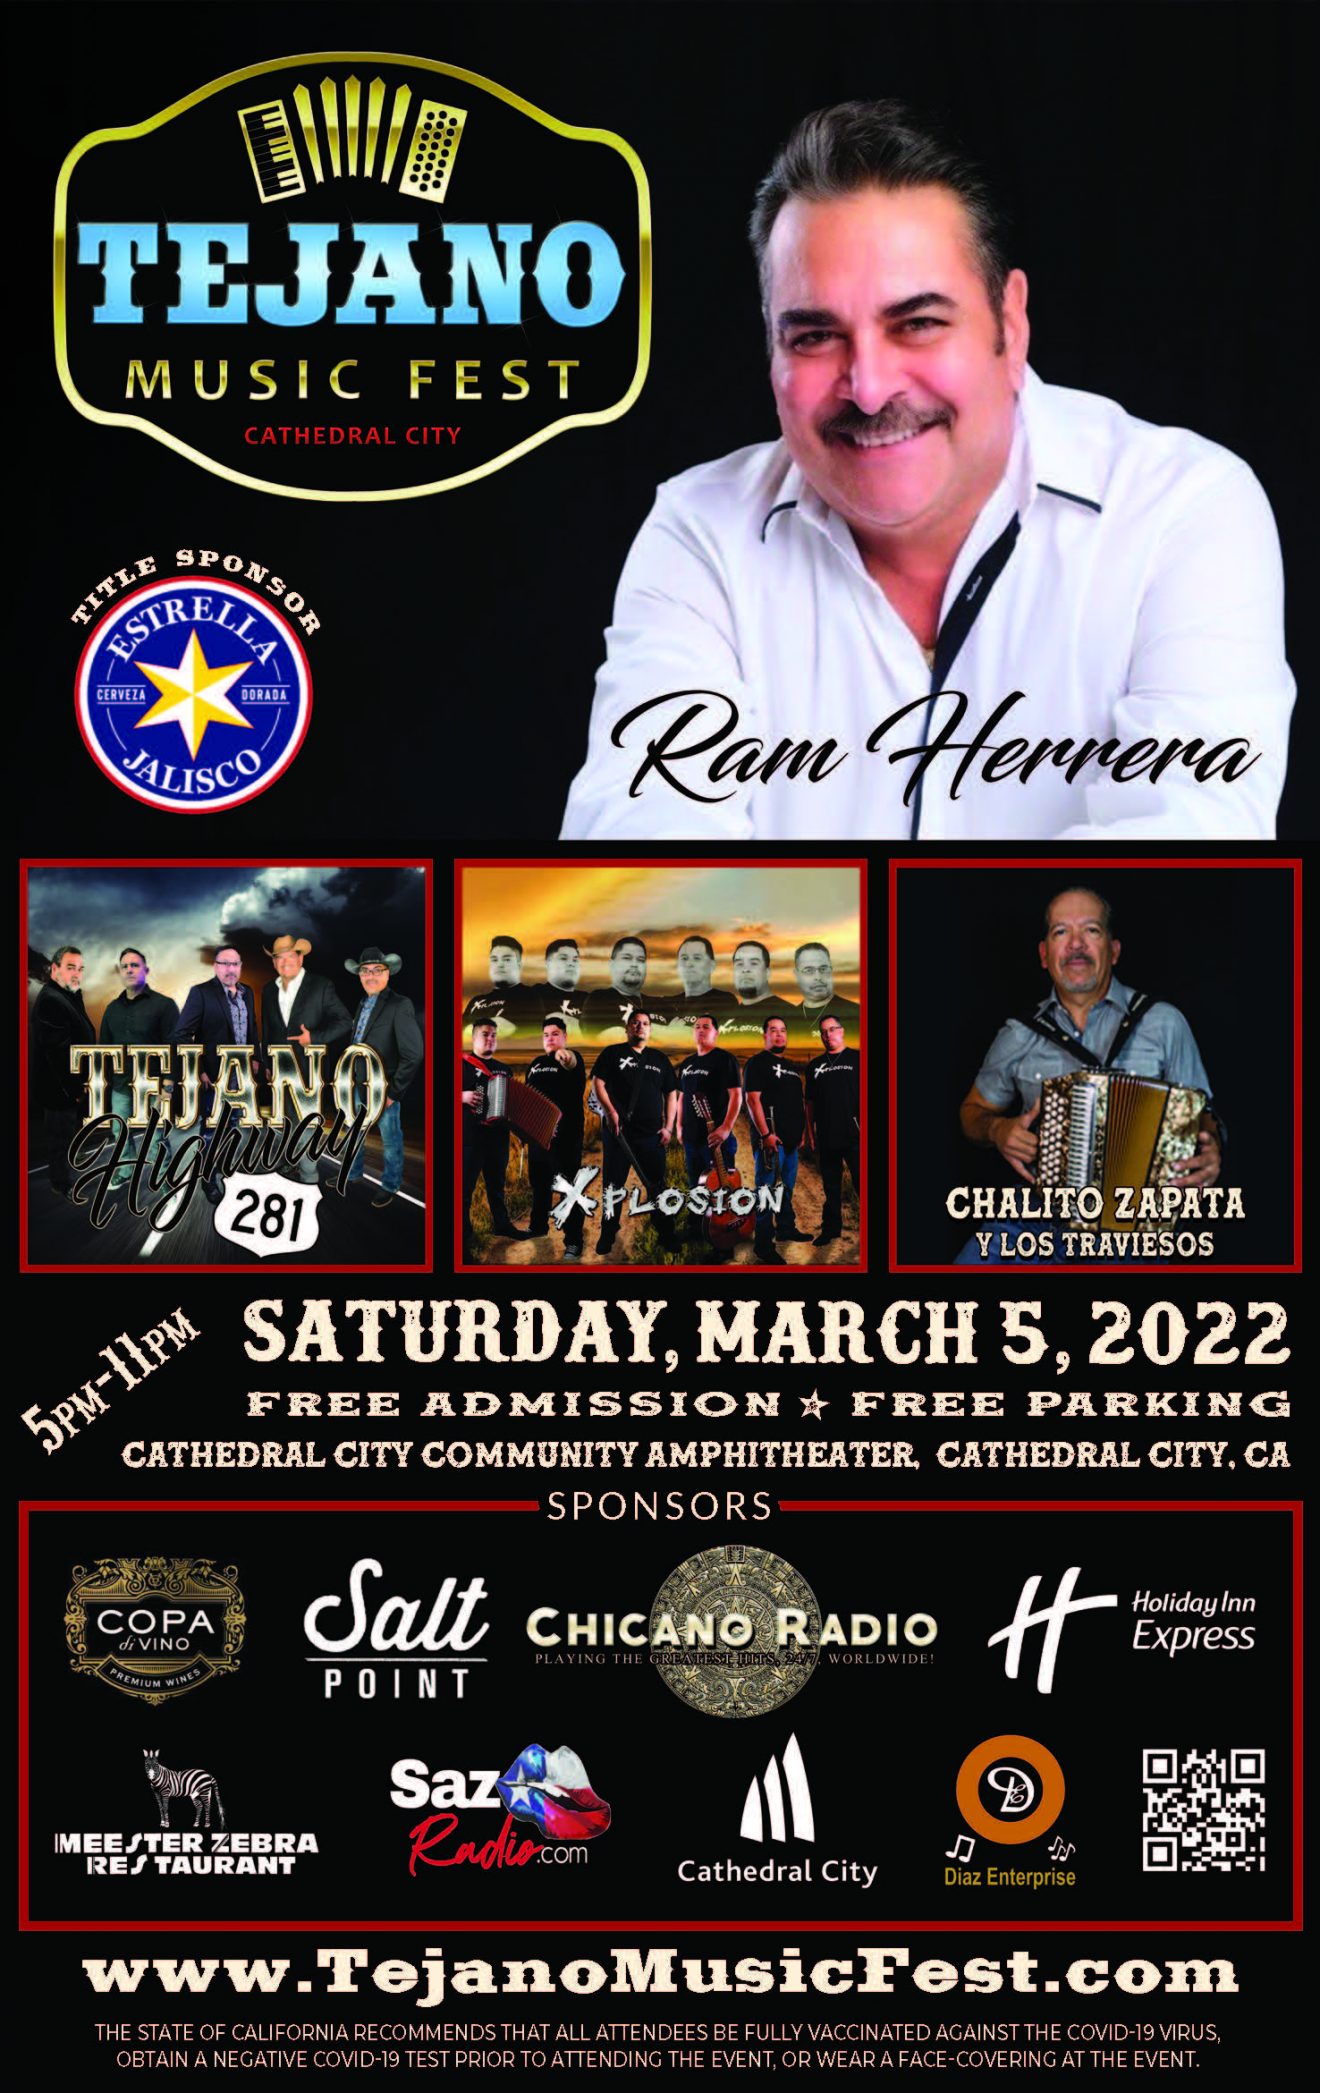 4th Annual Tejano Music Fest This Weekend Features Tejano Legend Ram Herrera